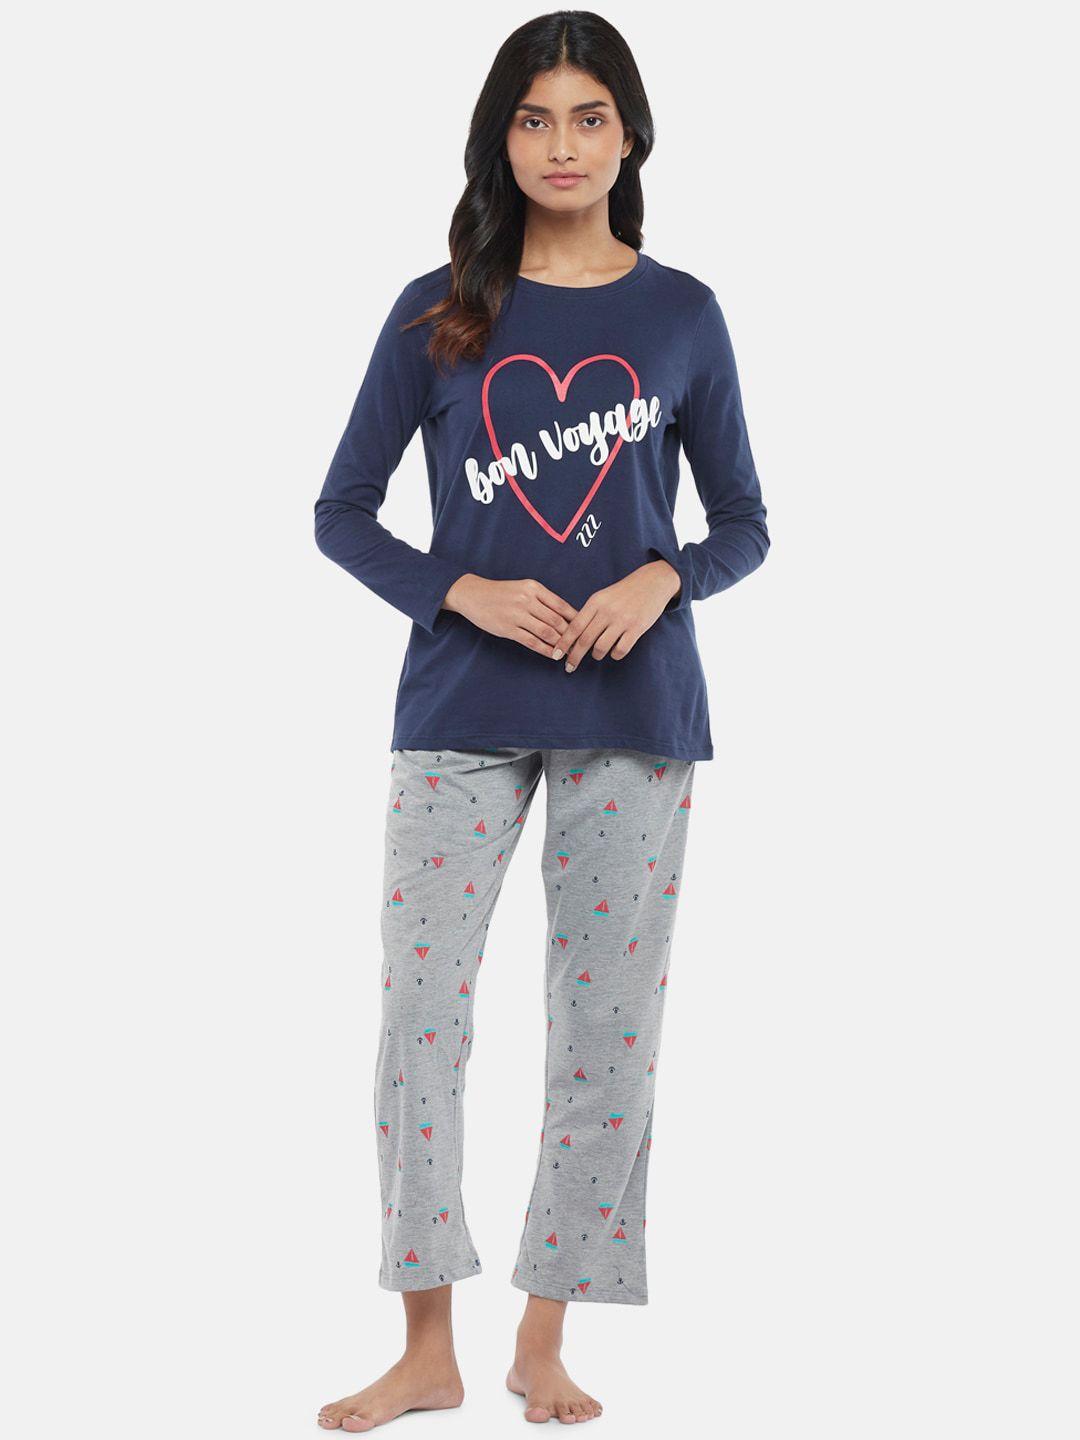 dreamz by pantaloons women navy blue & grey printed cotton night suit